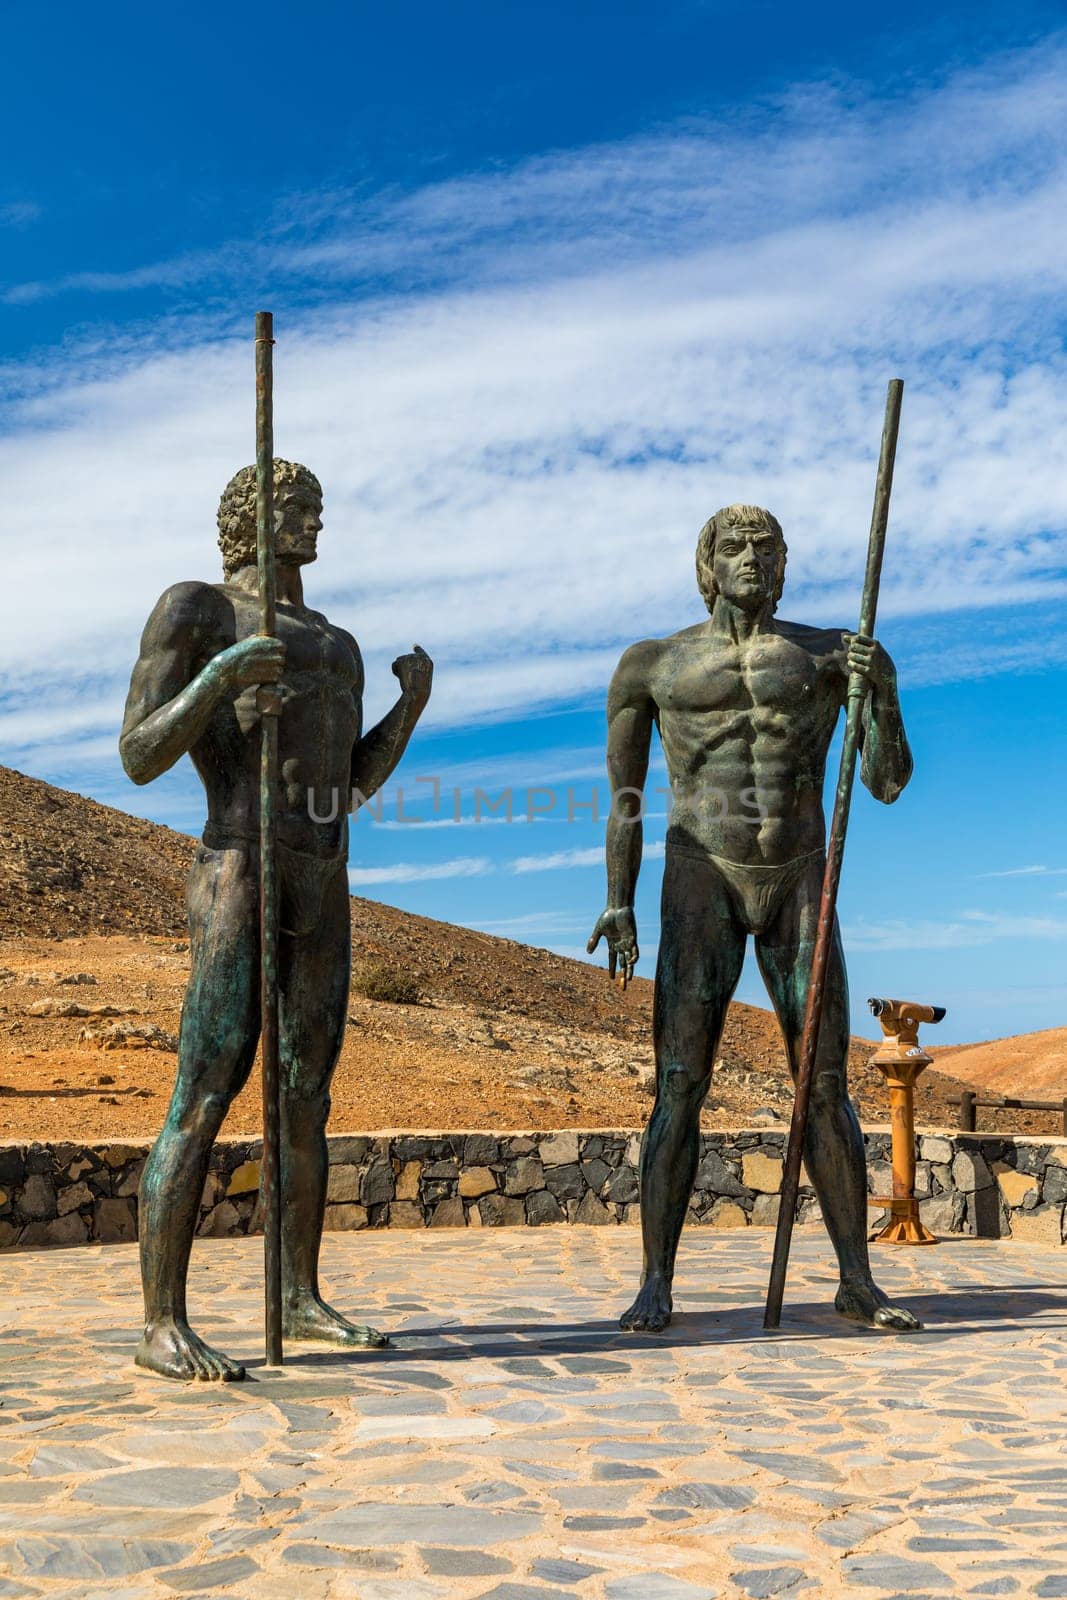 Two giant statues of the ancient kings of Fuerteventura installed on the Giza viewpoint, Betancuria, Fuerteventura, Spain by DaLiu